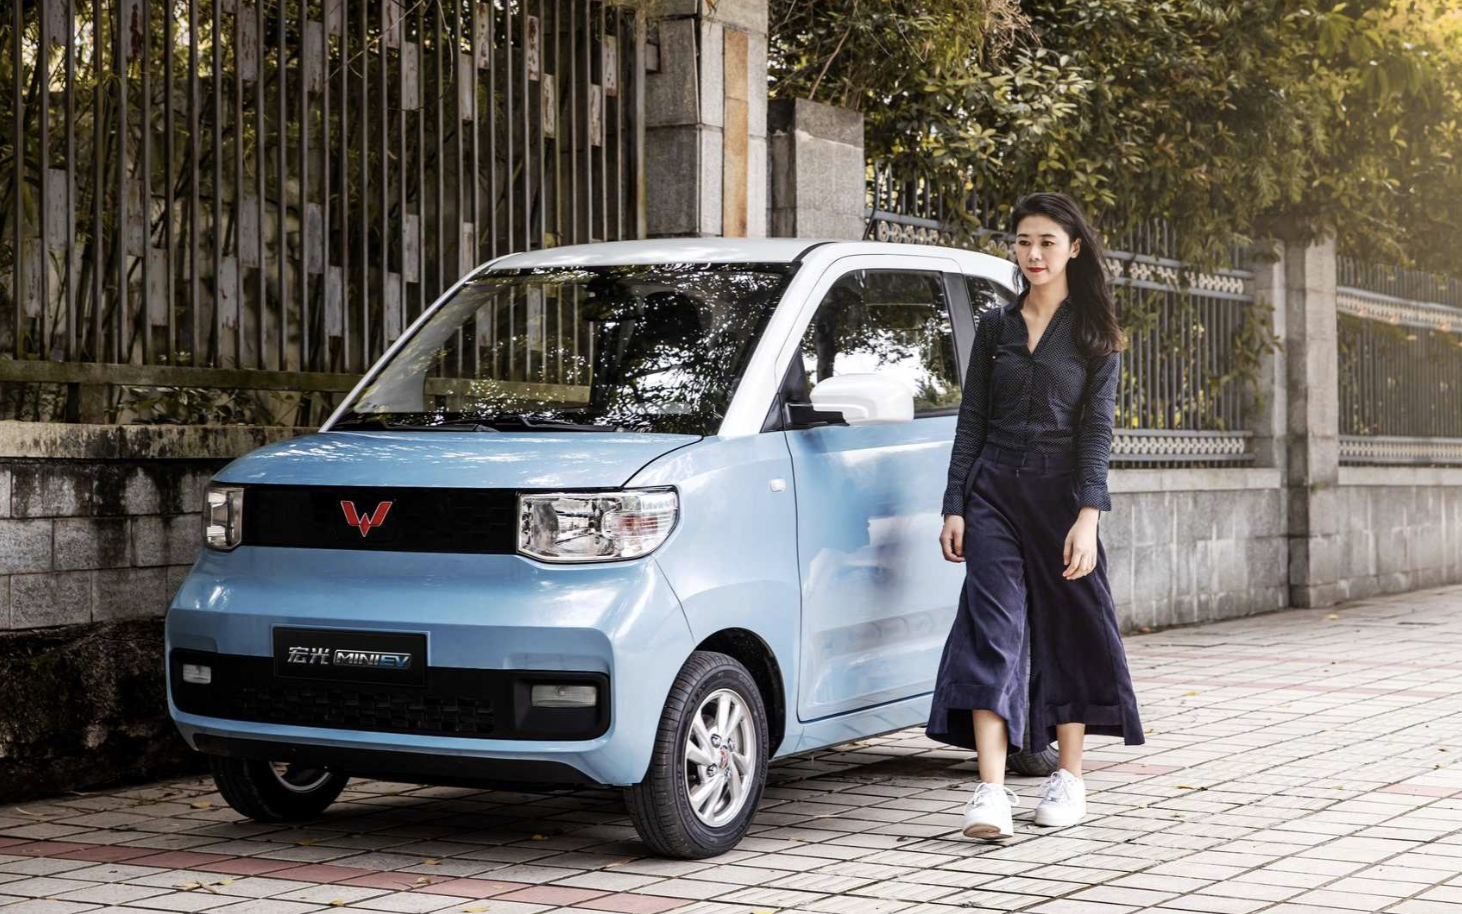 Cheap mini electric cars of less than 200 million VND are hard to find “living land” in Vietnam